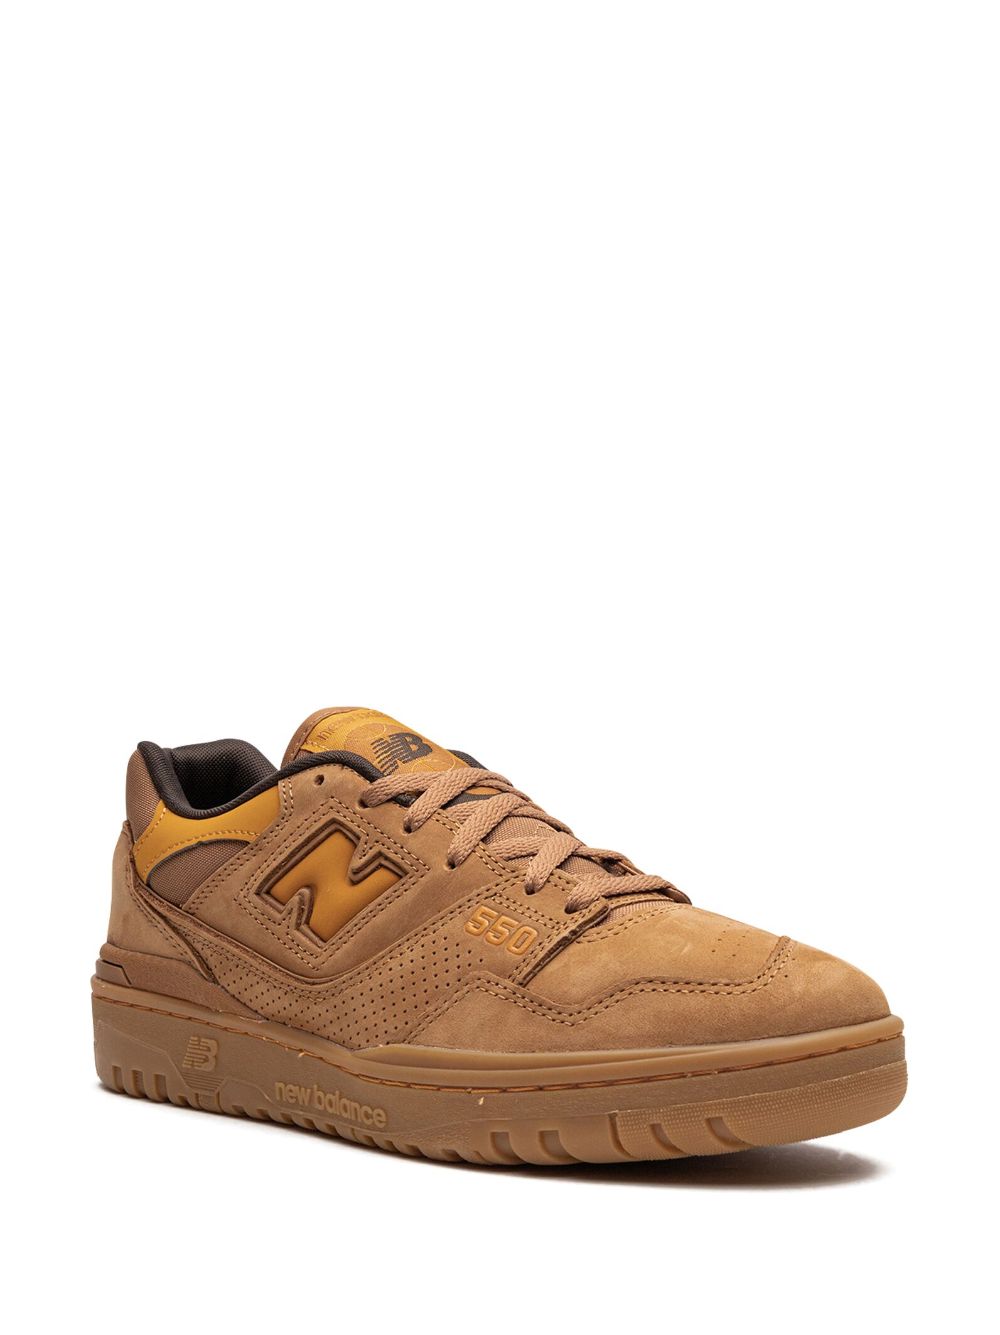 Image 2 of New Balance 550 "Wheat" sneakers